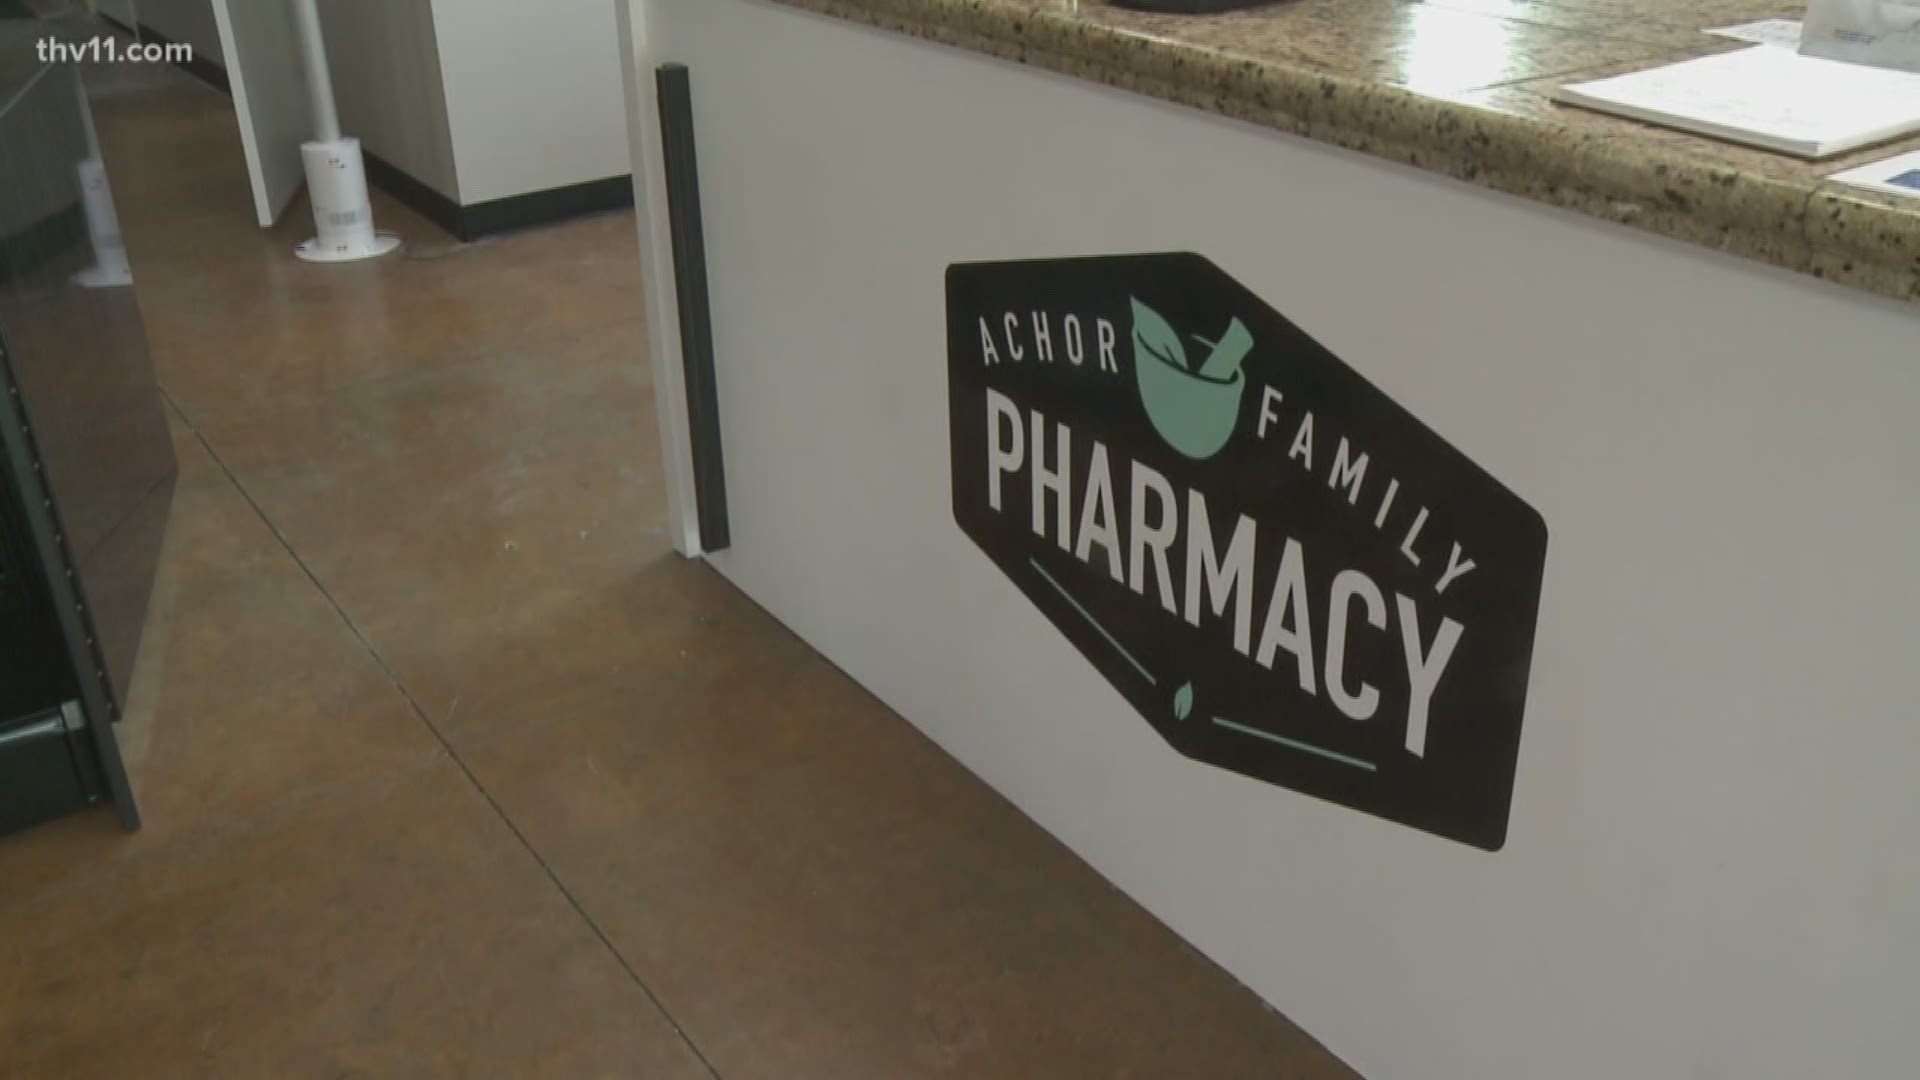 Maumelle's only neighborhood pharmacy closed its doors months ago, but a new pharmacy has been open for a week and plans to combat the source of the previous shop's closure: PBM's.